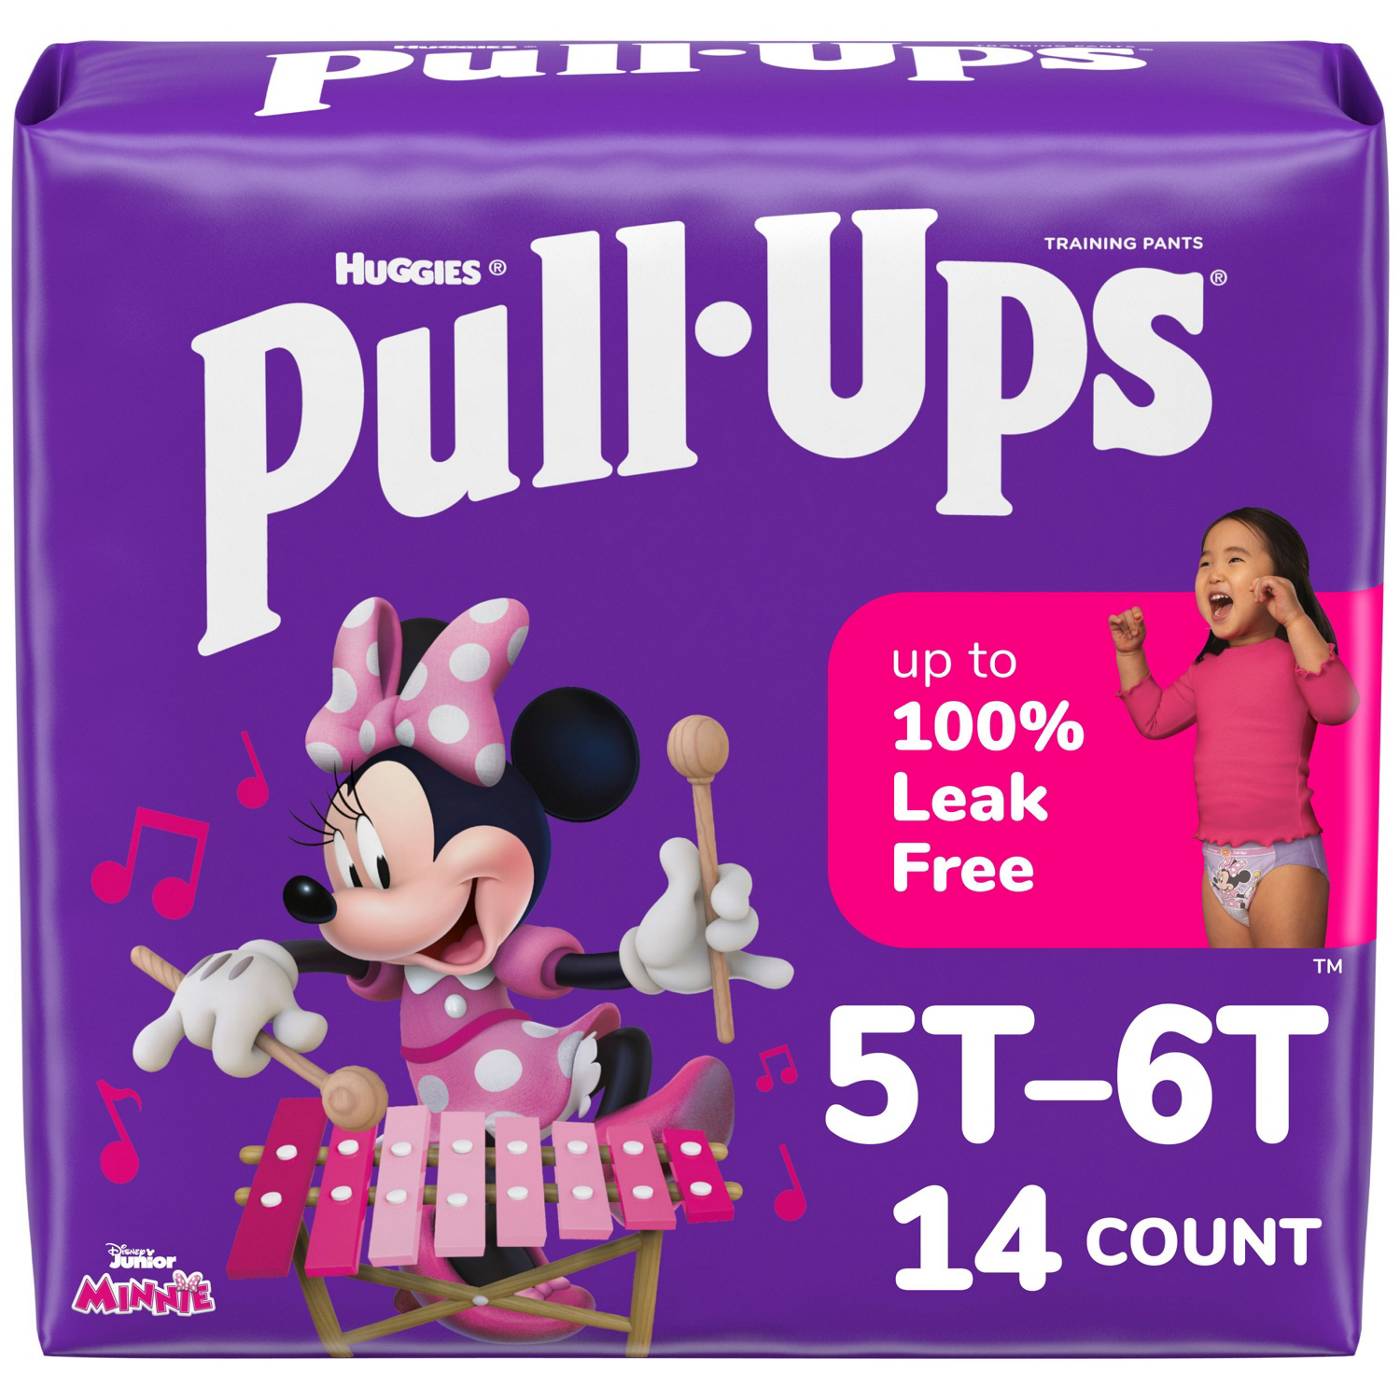 Pull-Ups New Leaf Potty Training Pants for Girls (Size: 2T-5T